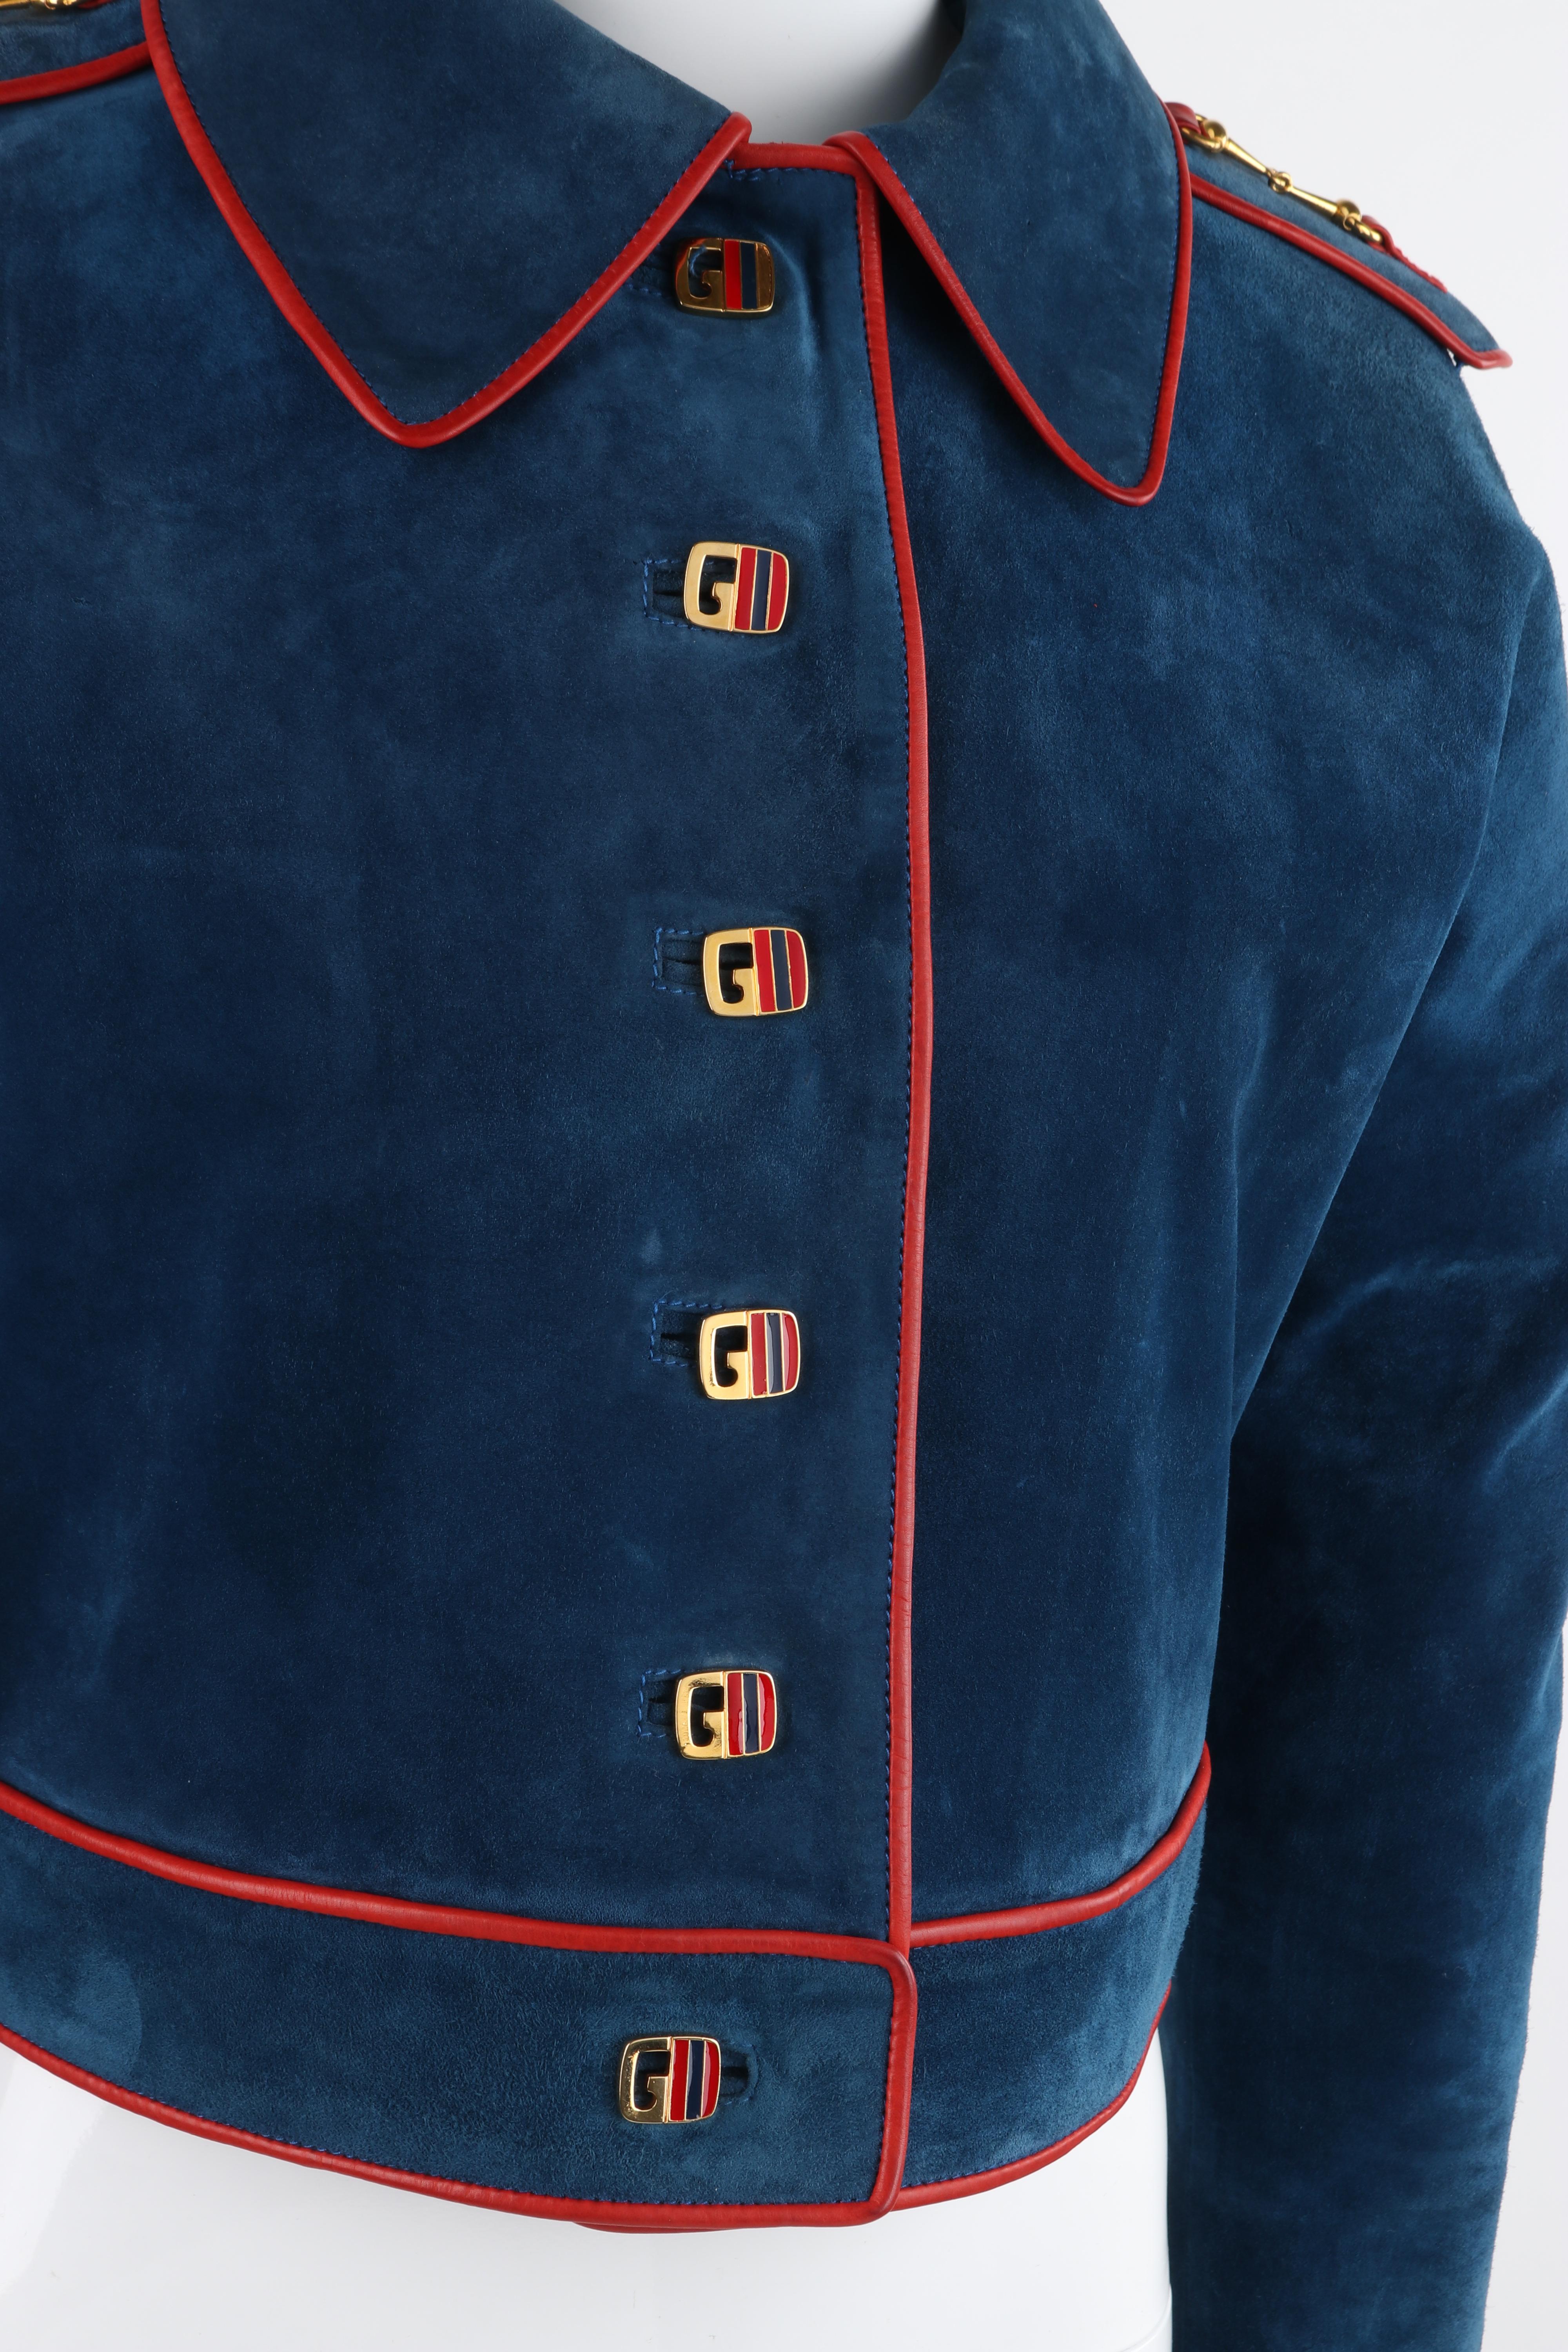 GUCCI c.1970s Blue Red Suede Leather Trim Horse Bit Button-Up Cropped Jacket In Good Condition For Sale In Thiensville, WI